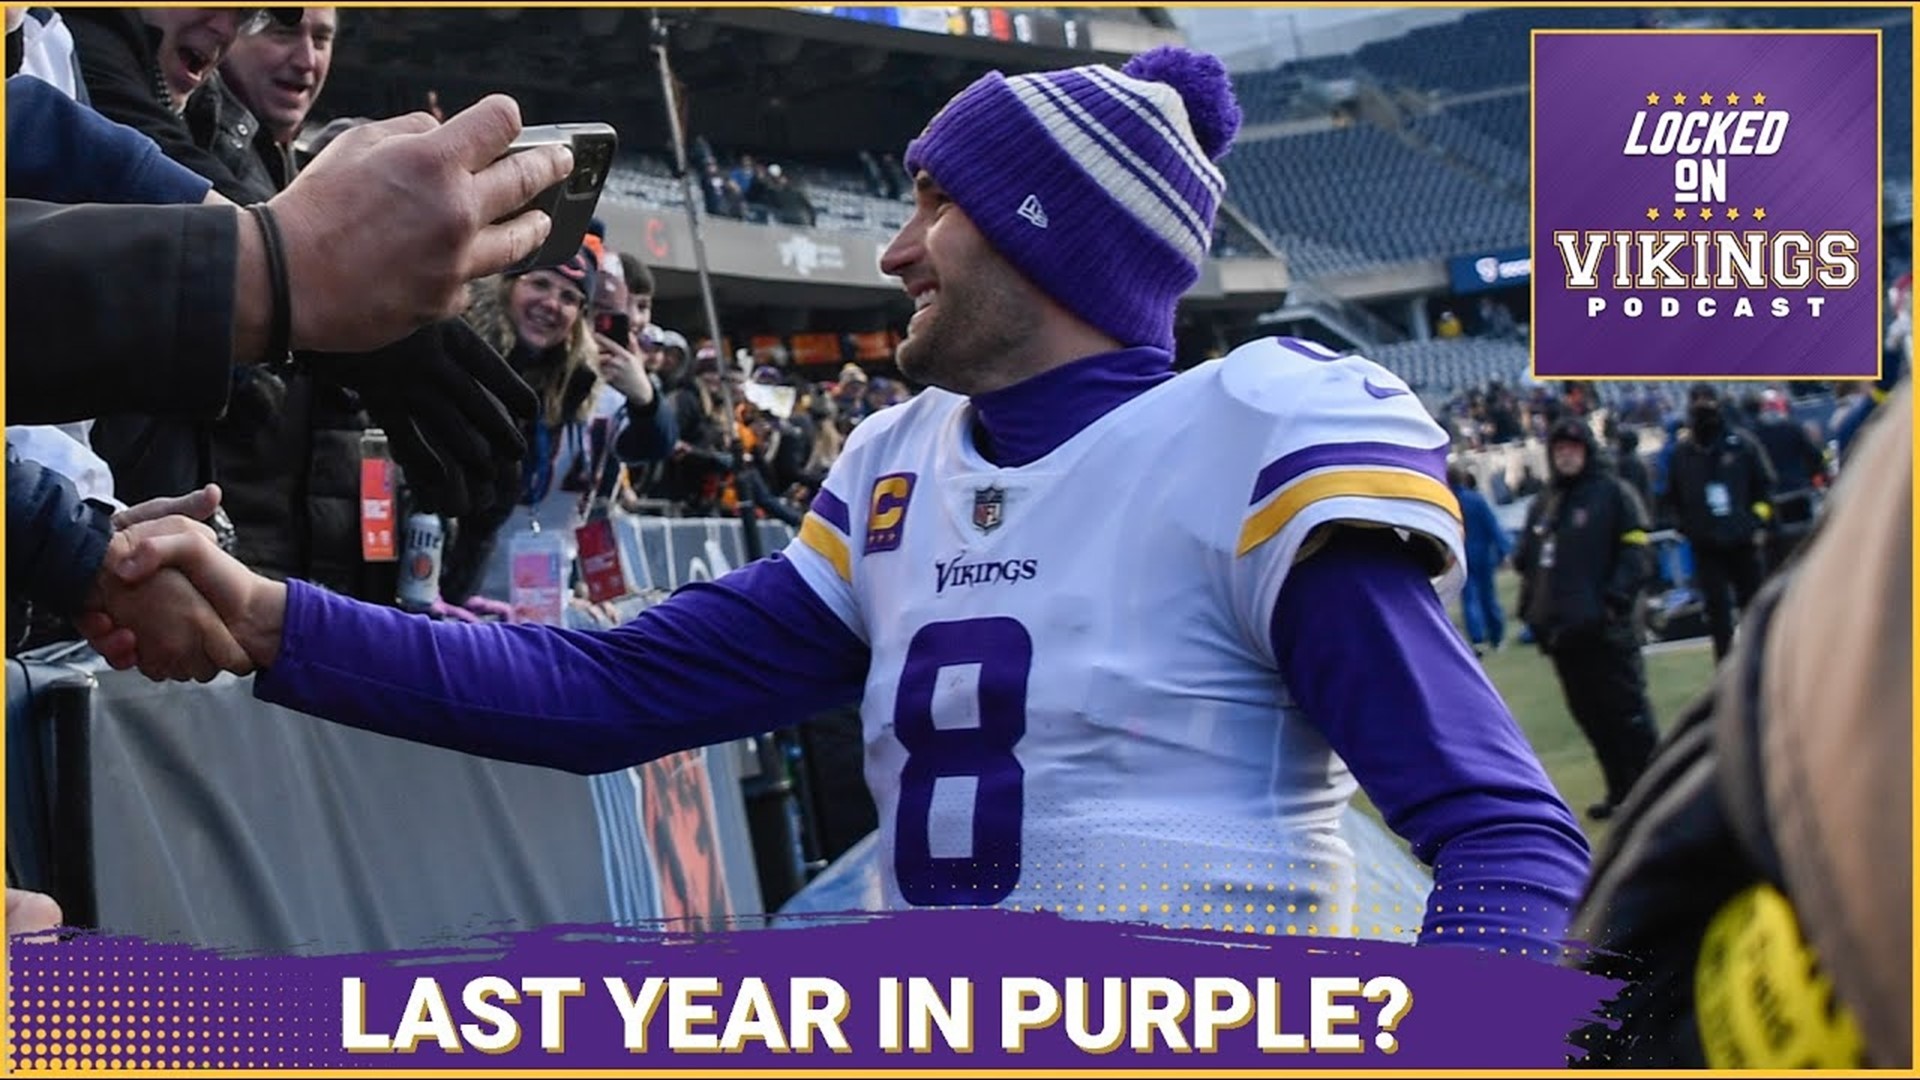 With the way the Minnesota Vikings have approached the cap this year, it seems like Kirk Cousins could be on the way out of Minnesota.